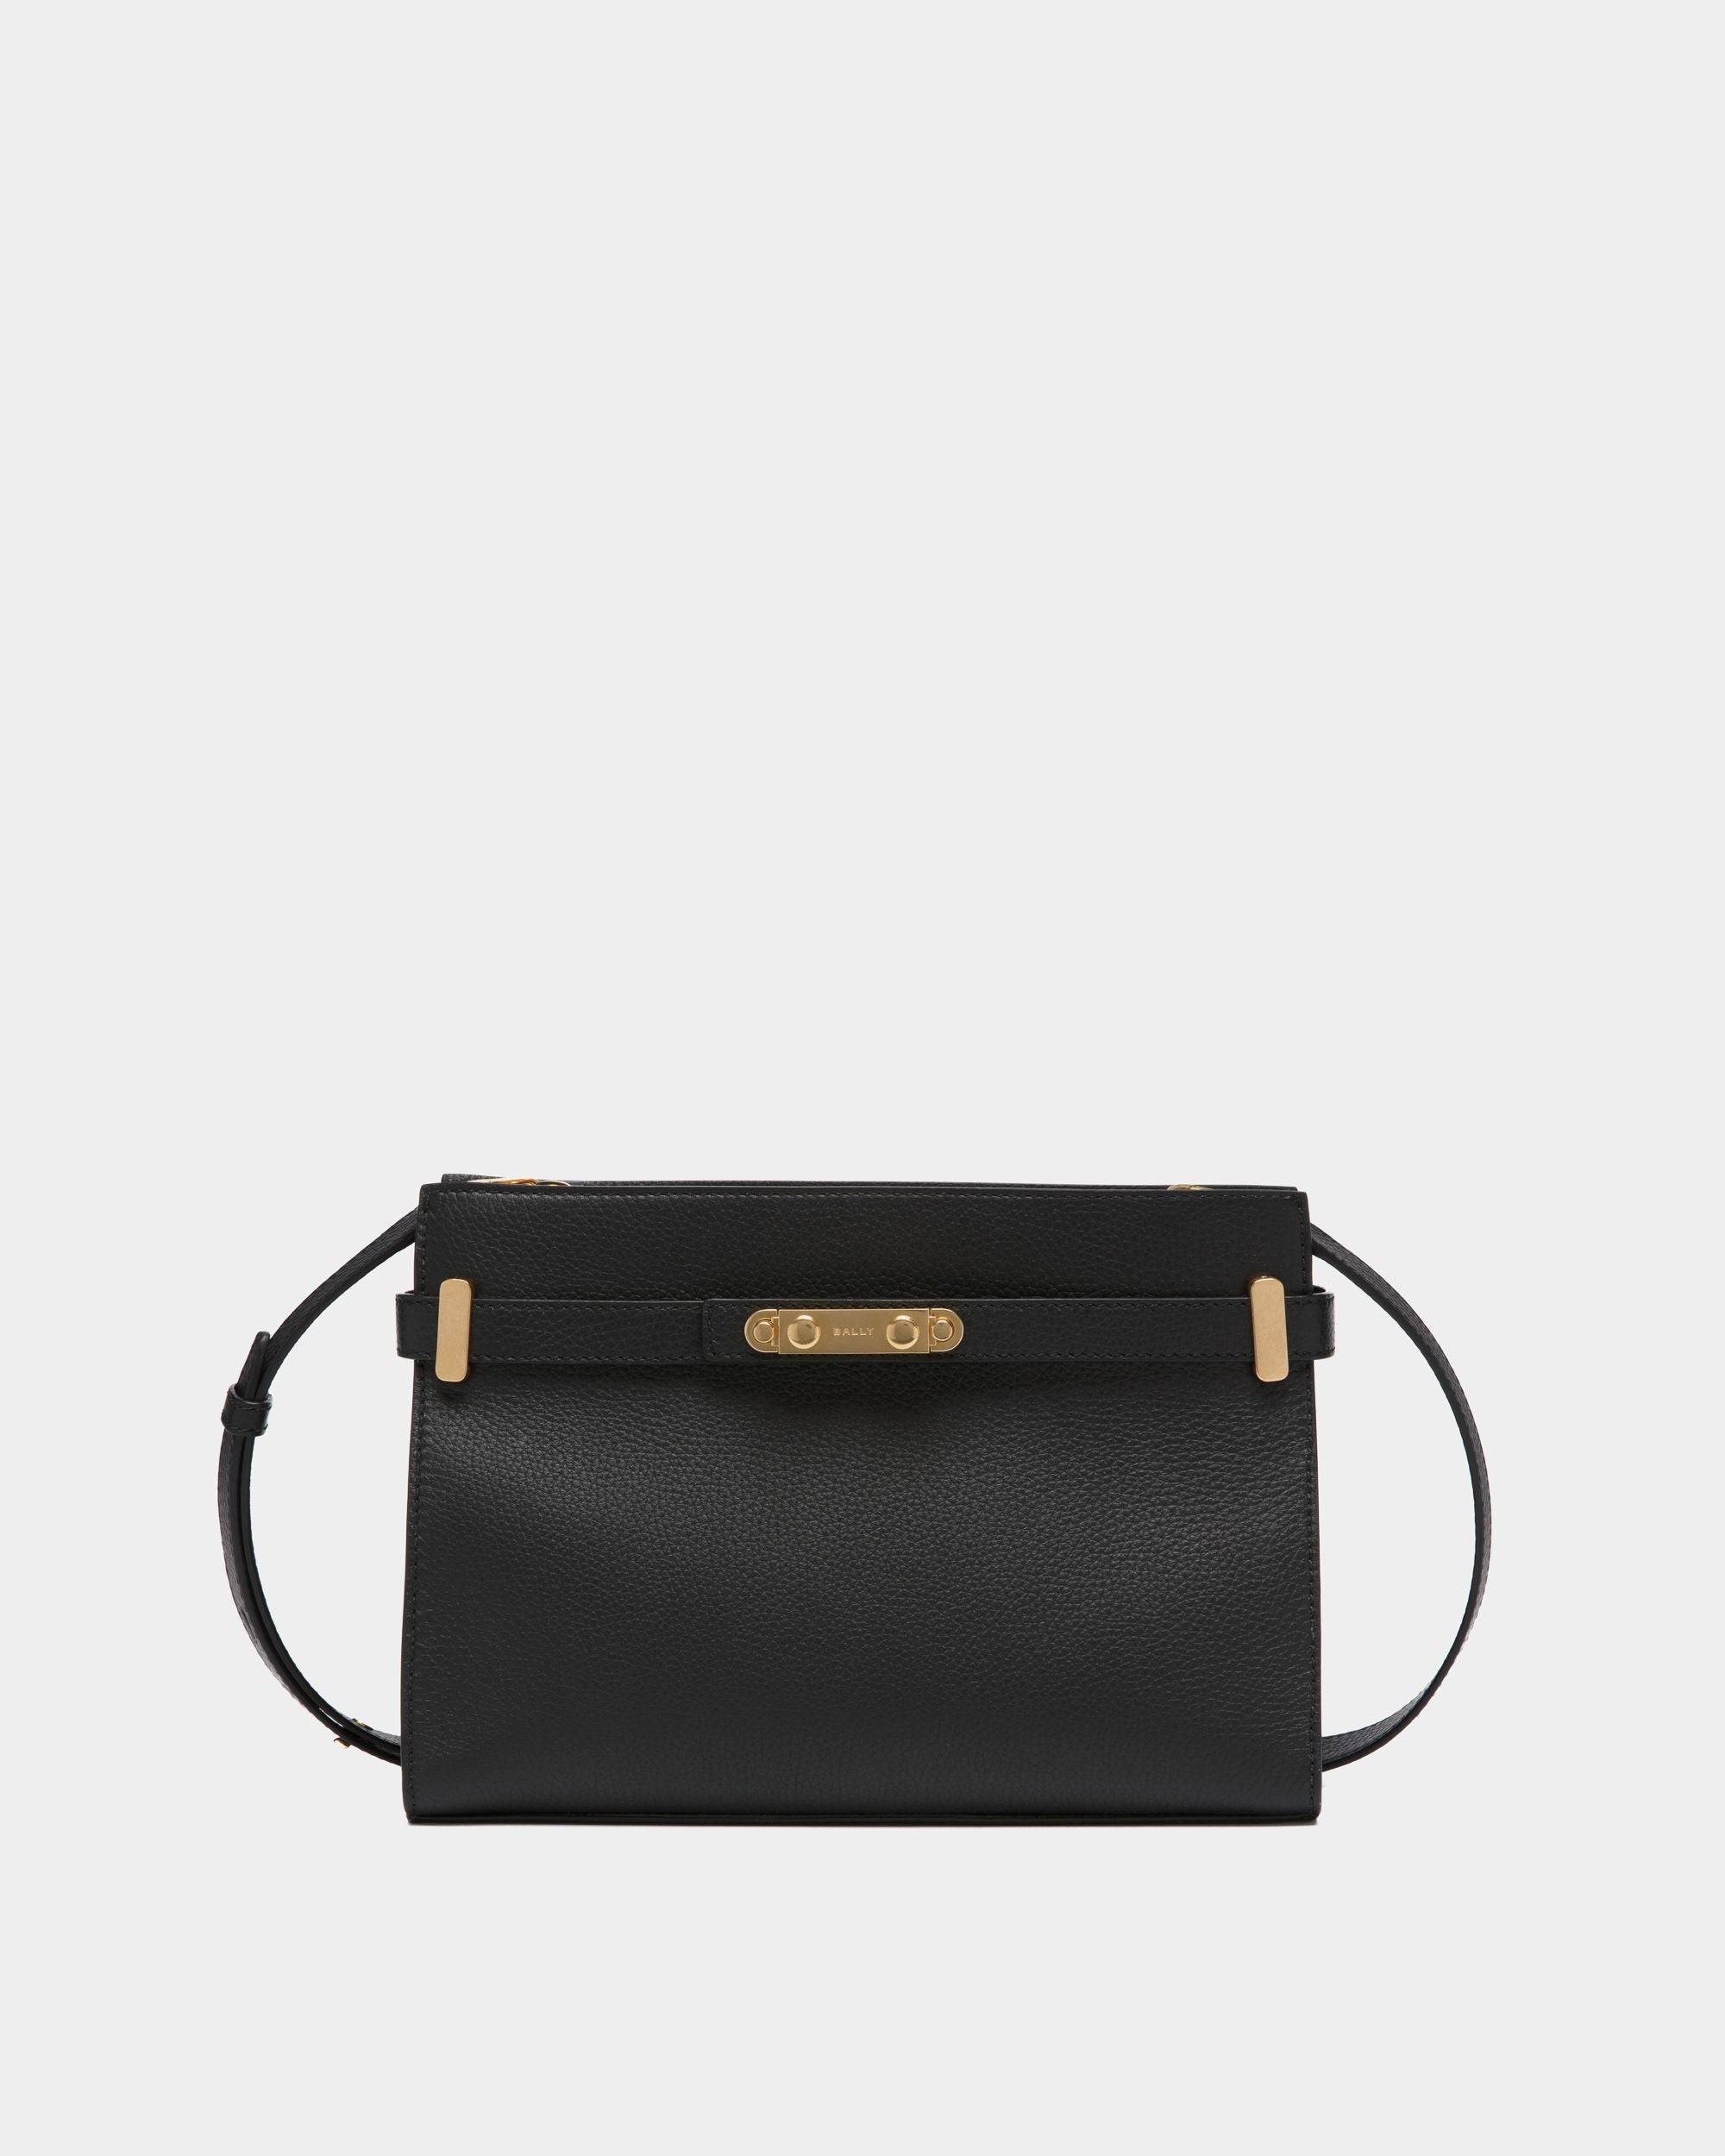 Carriage | Women's Shoulder Bag in Black Grained Leather | Bally | Still Life Front